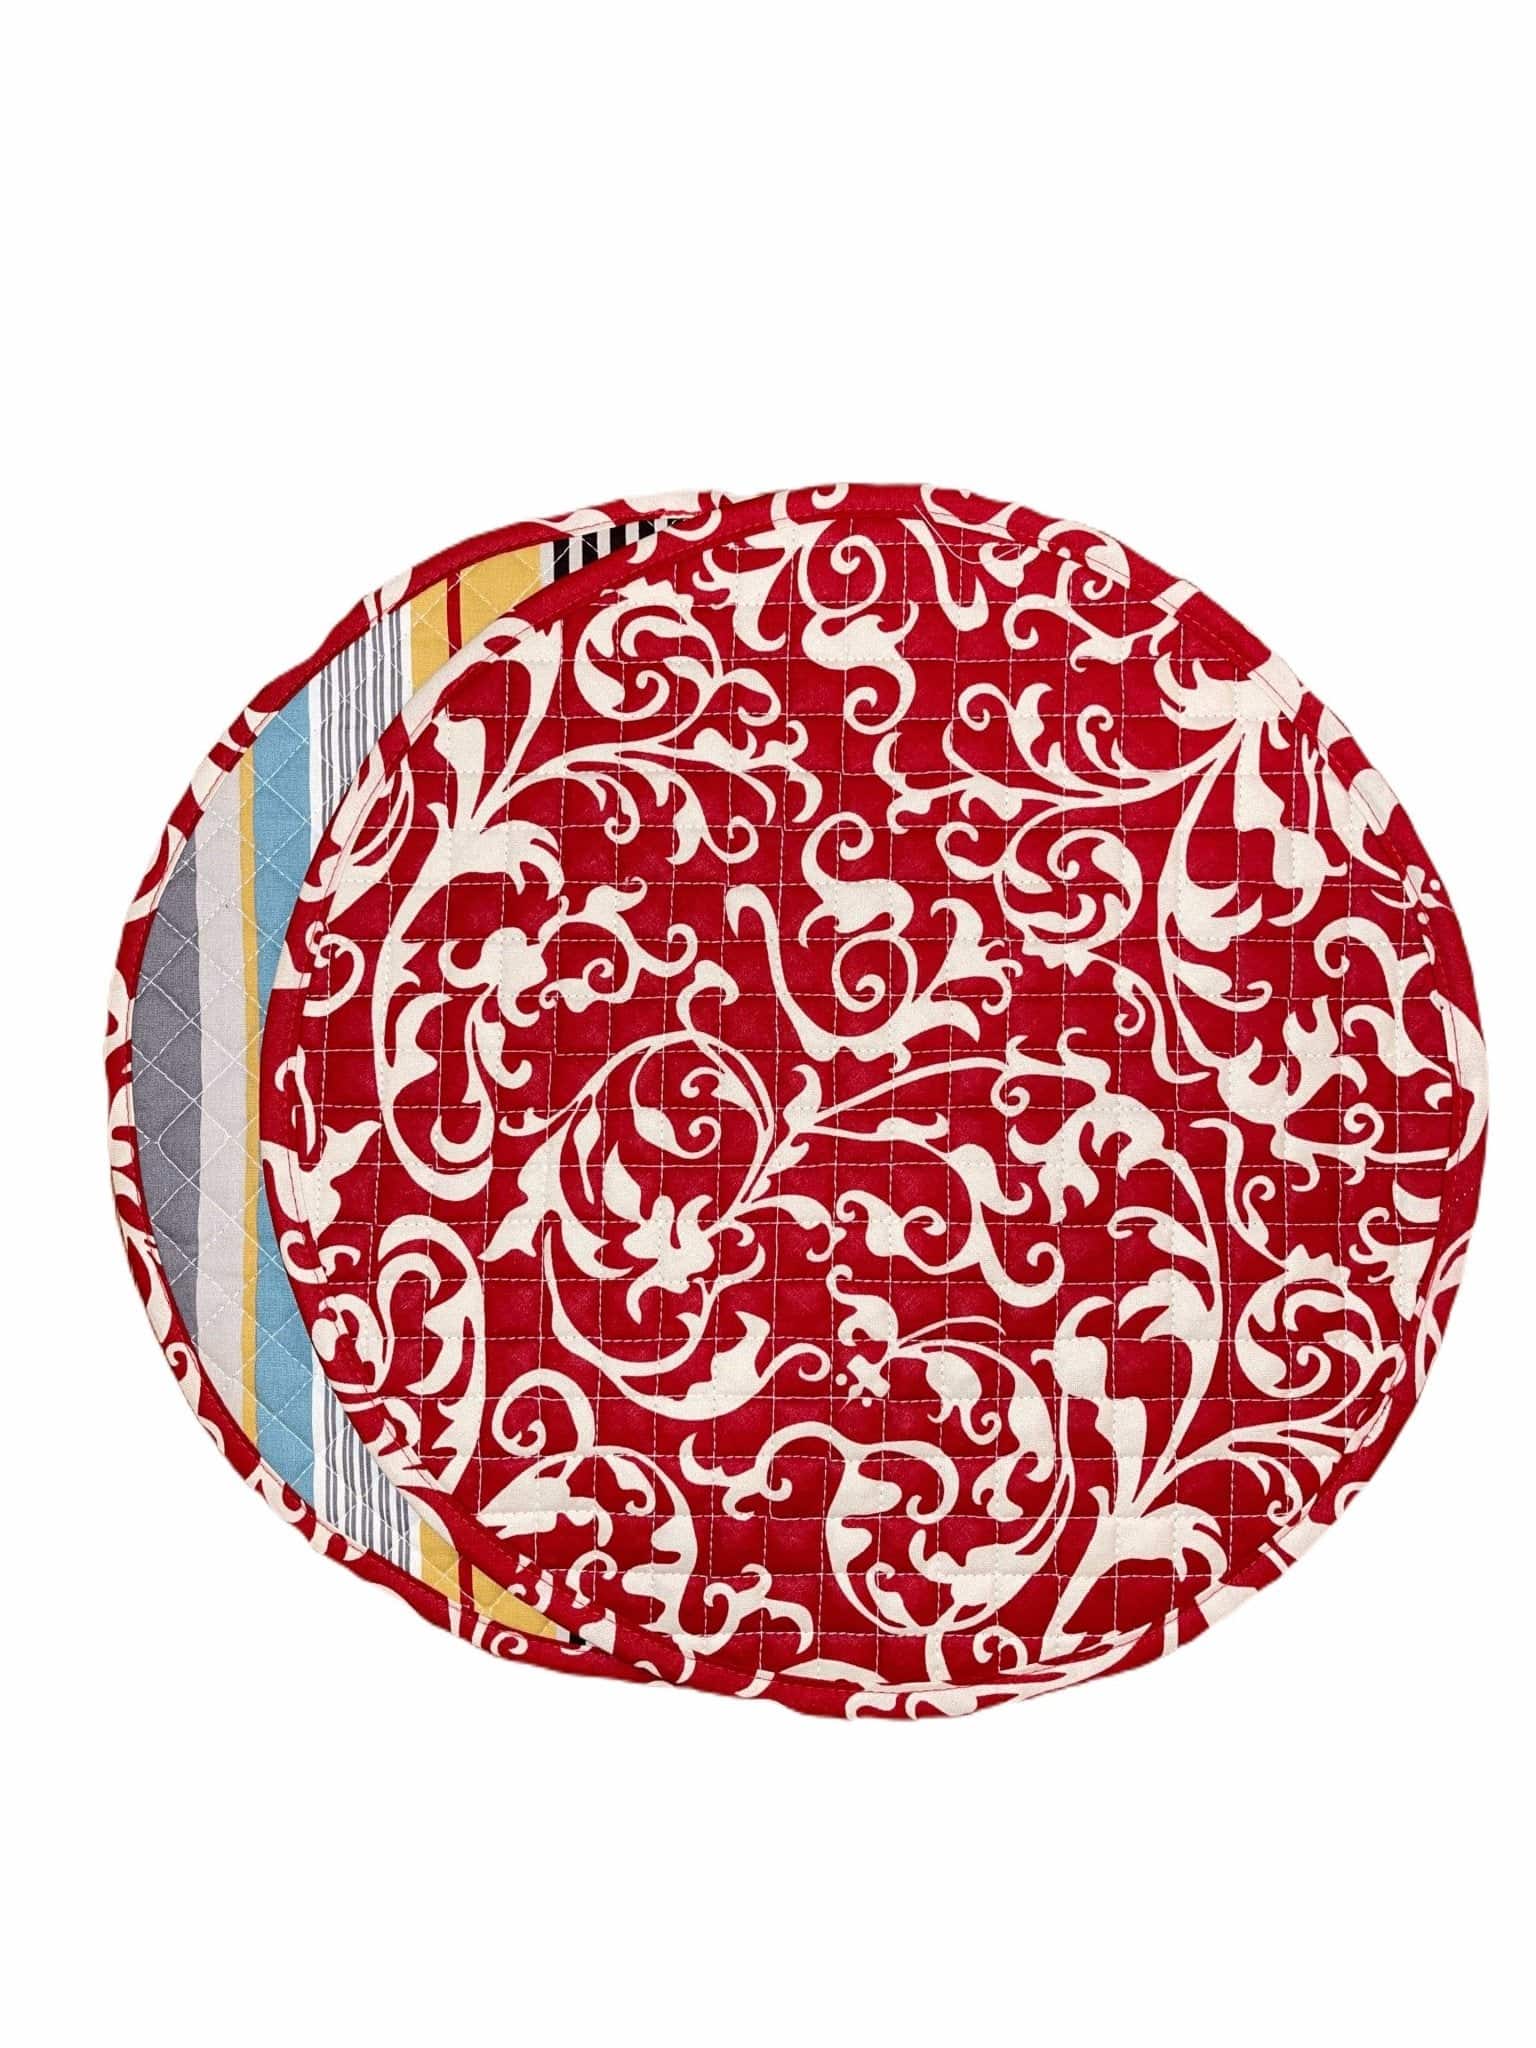 Hen House Linens devine scarlet red reversible bold striped licorice black printed round quilted cloth placemats